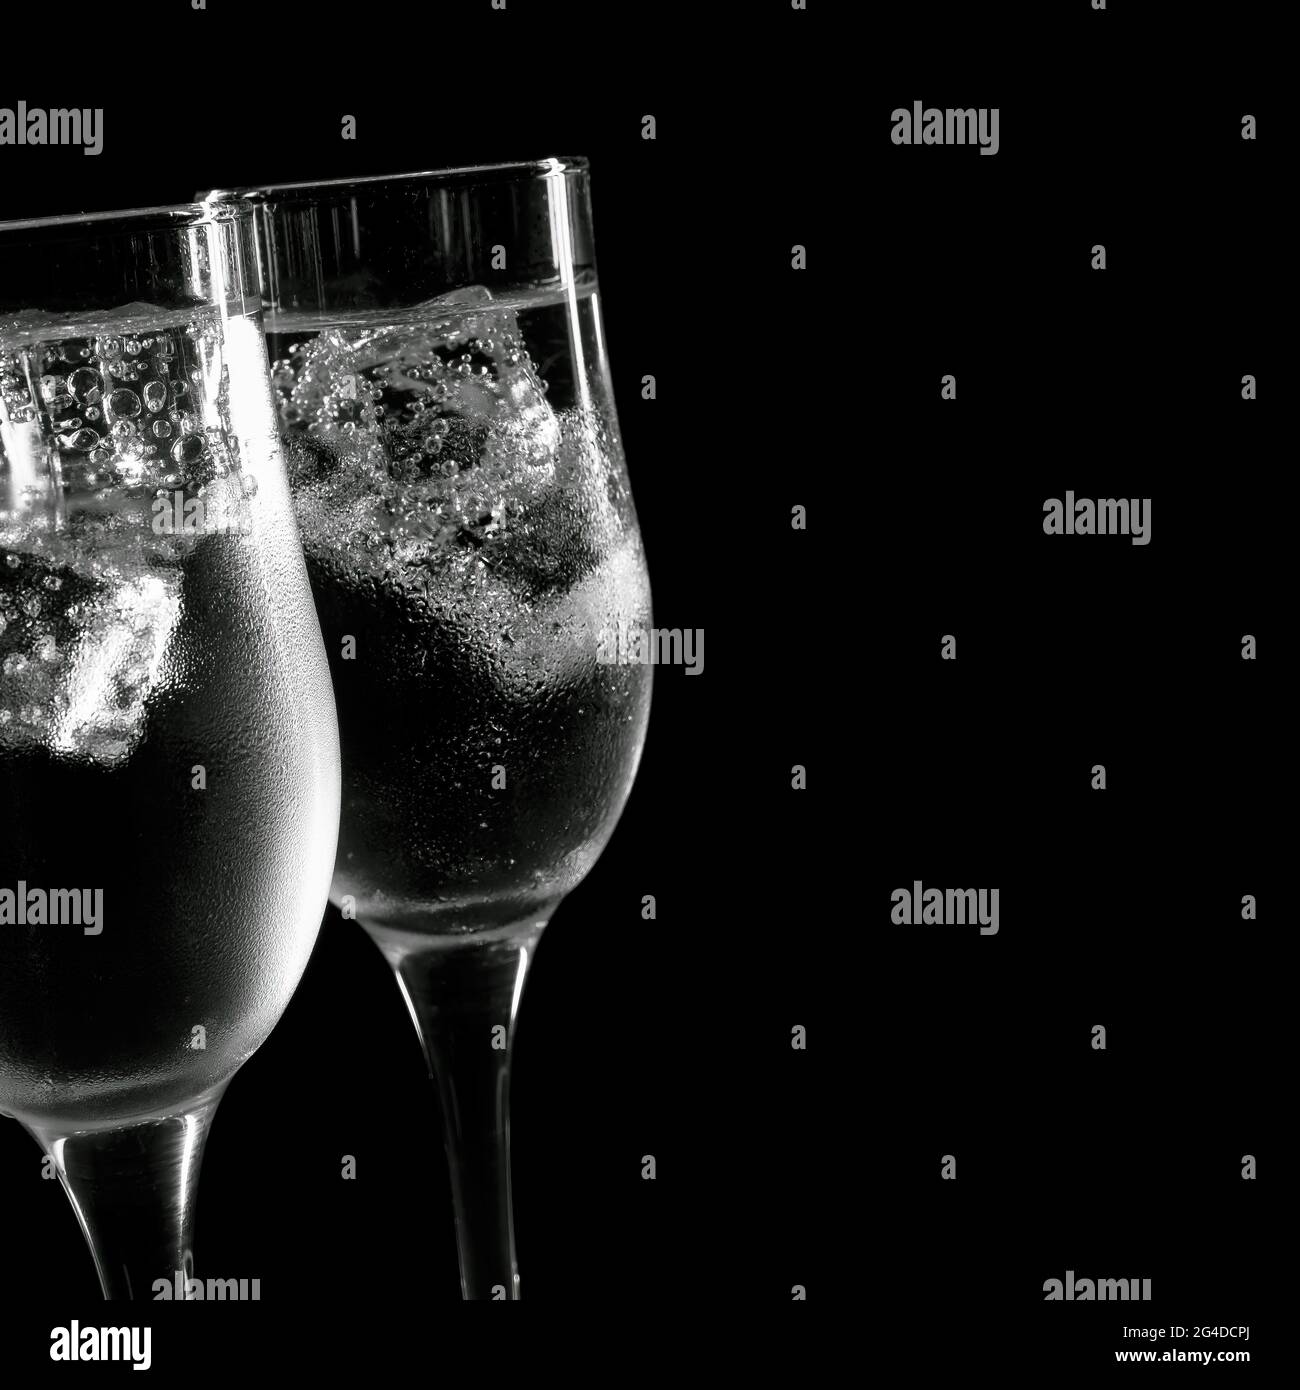 A refreshing, cold drink in glasses with ice on a black background. Stock Photo